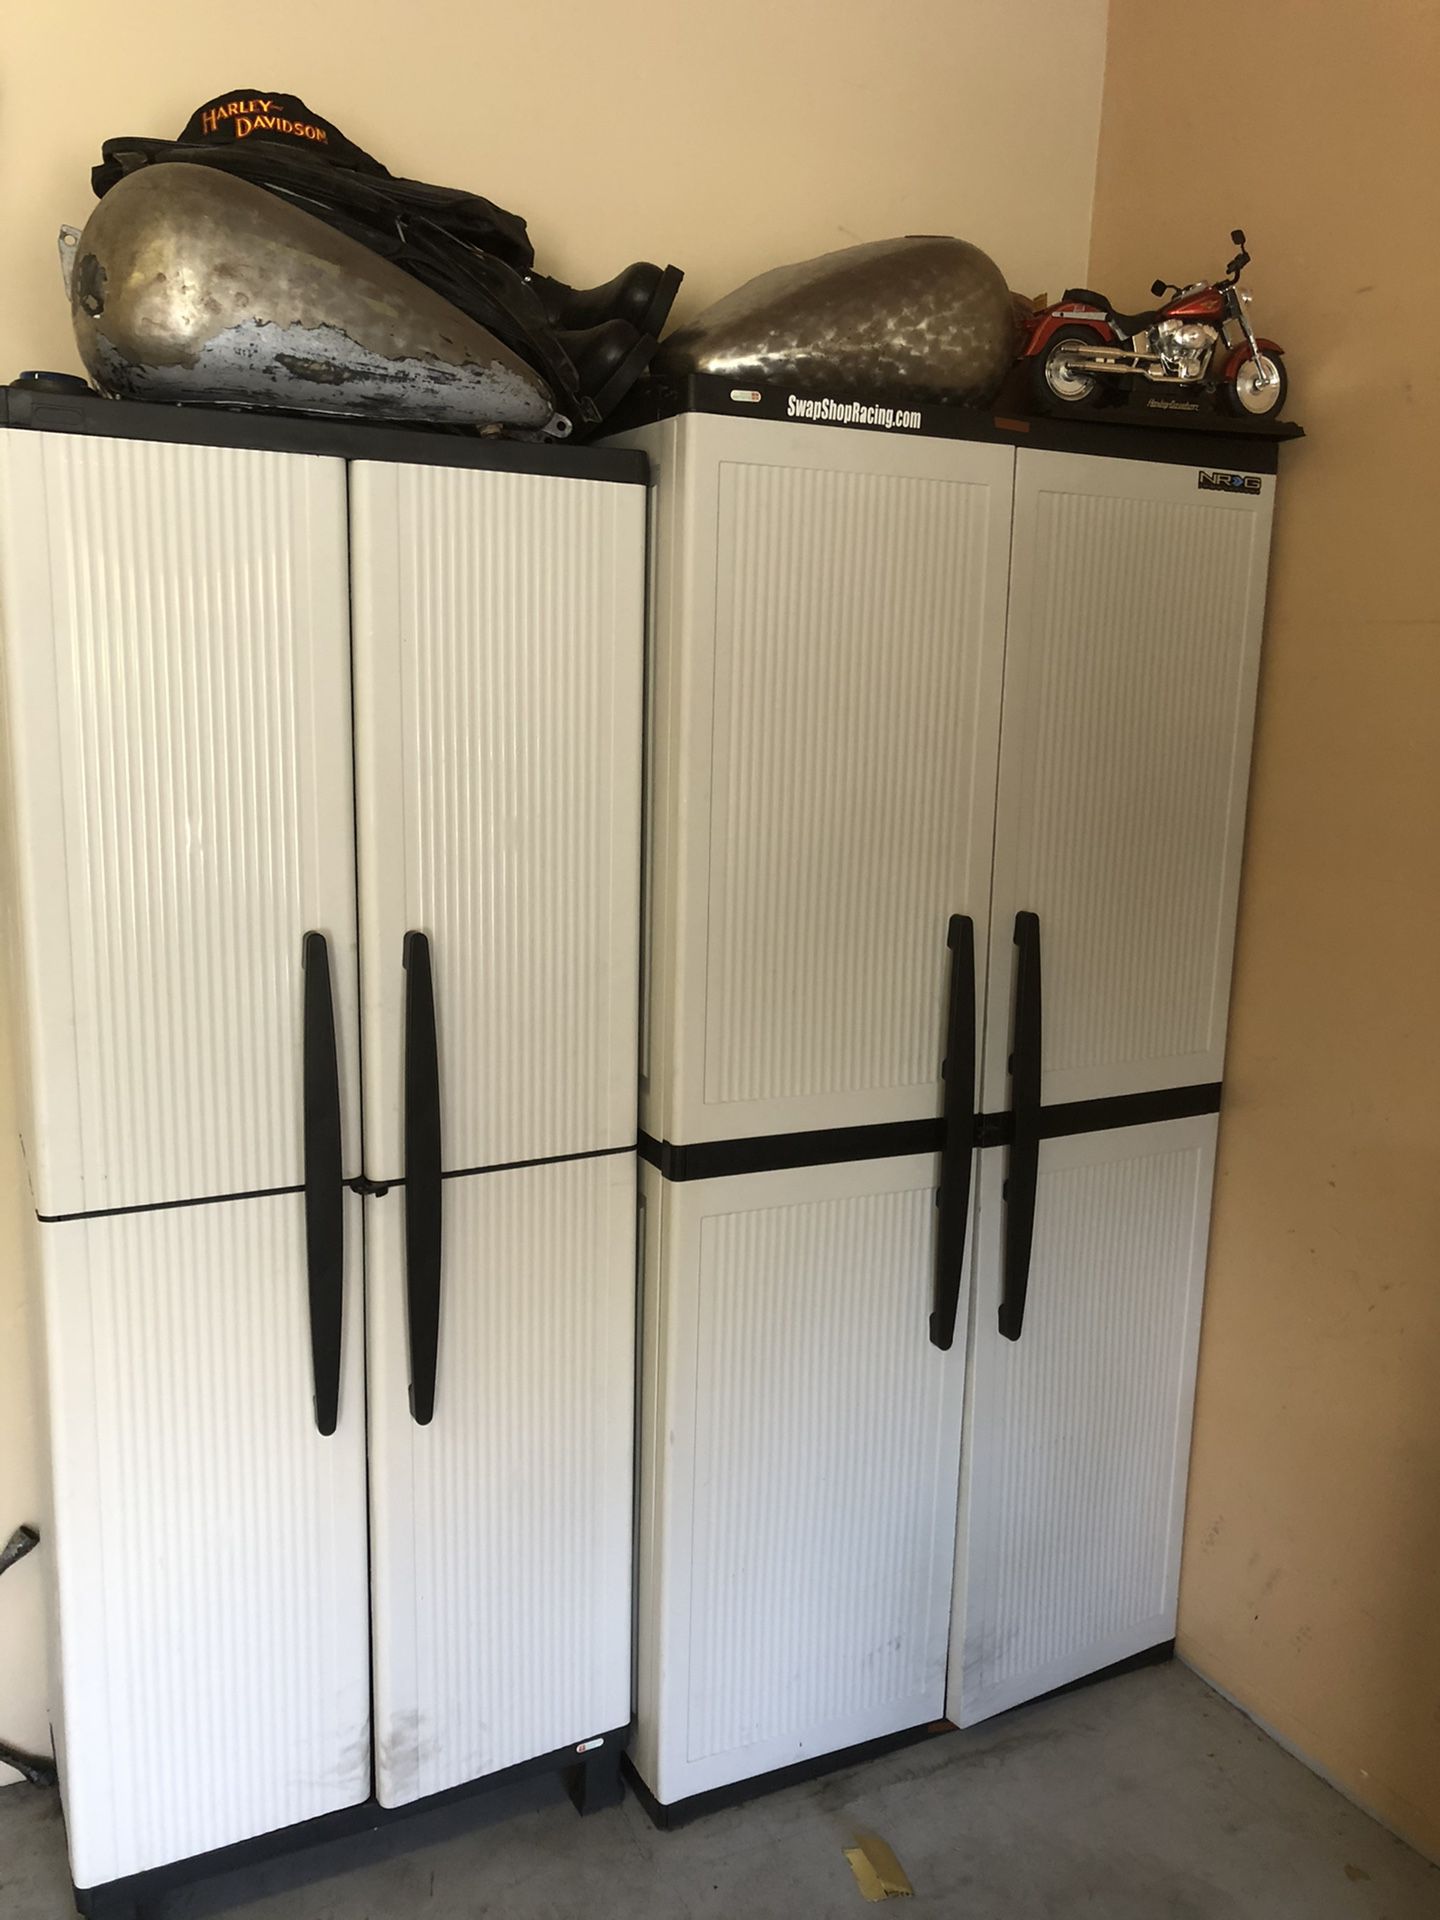 Two PVC garage cabinets